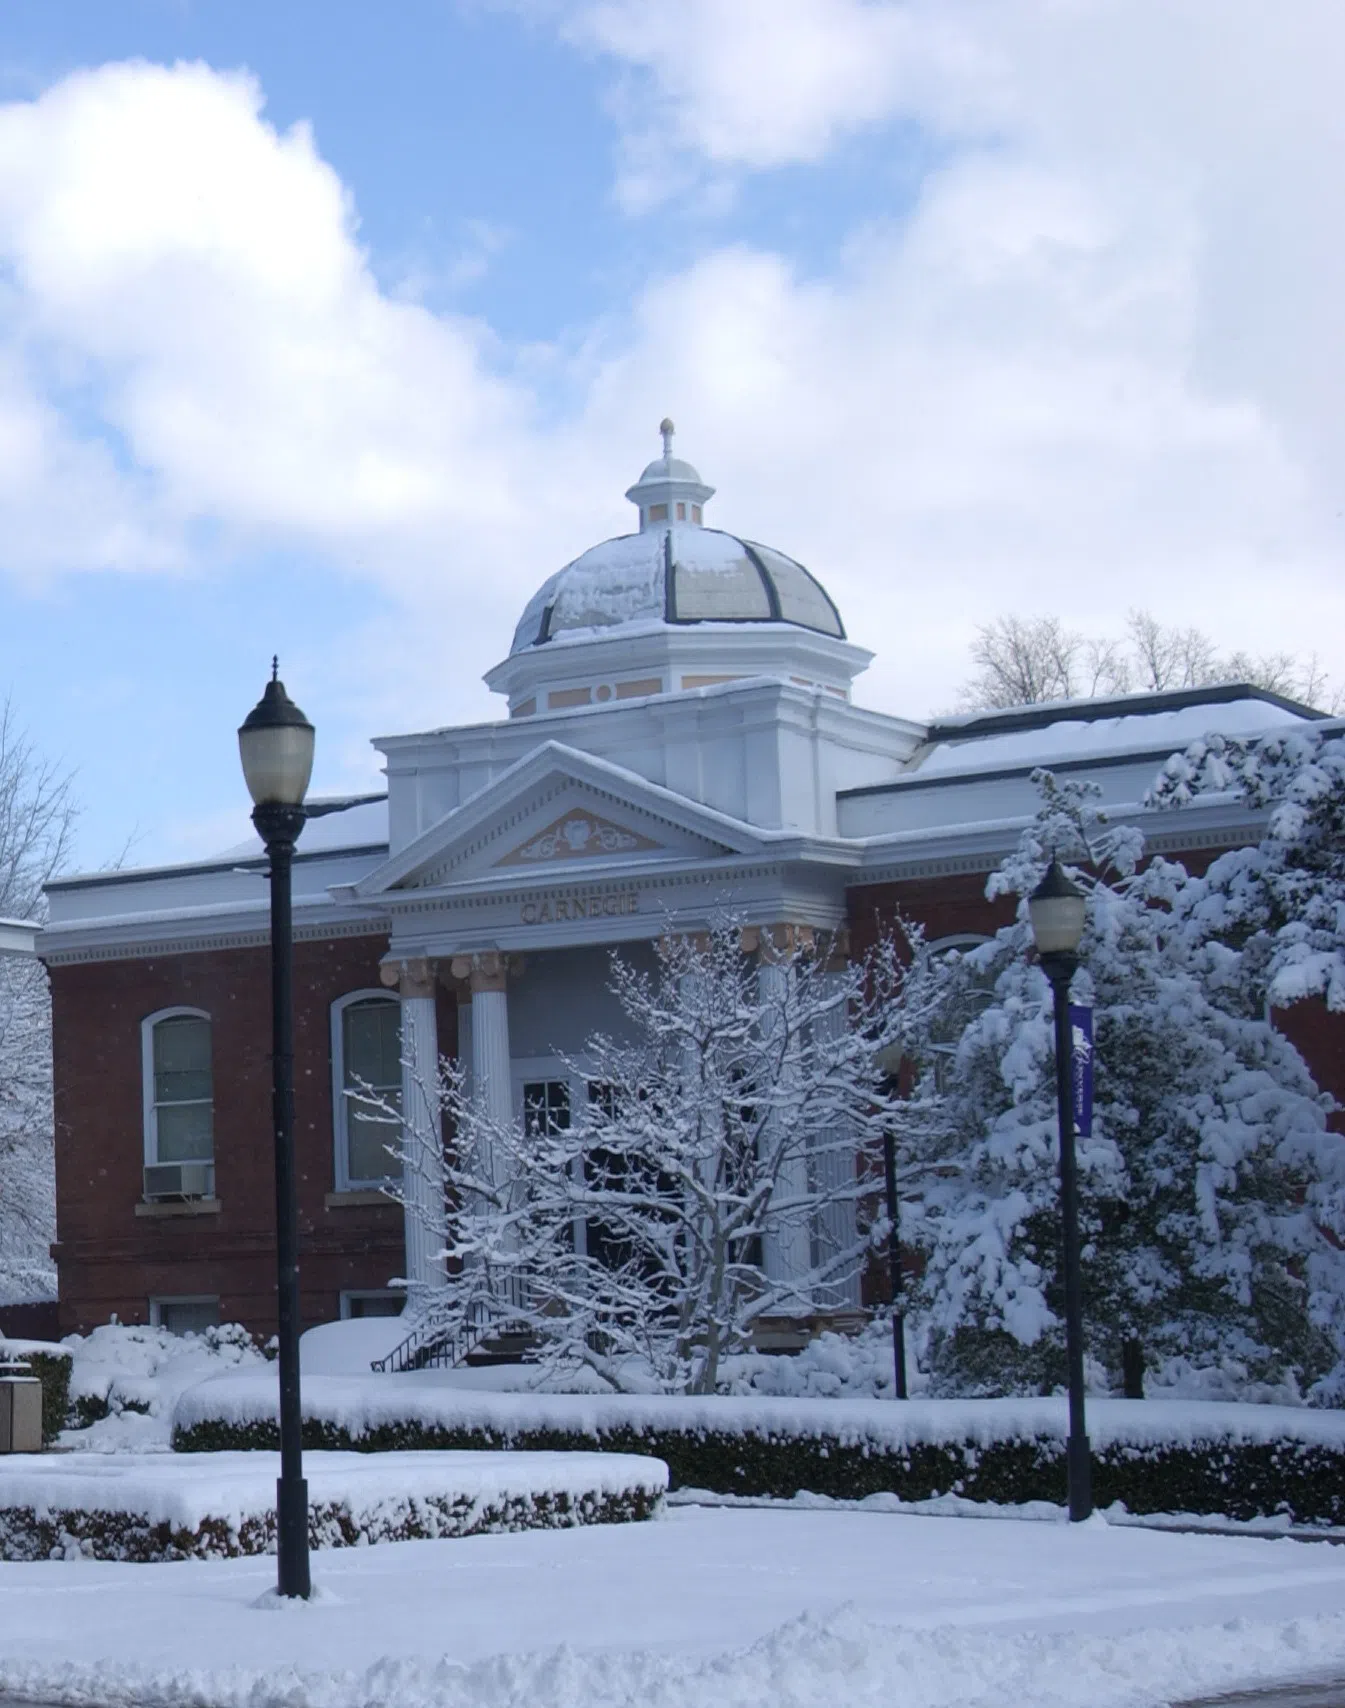 Snow covered brick building with four columns at the entrance and bronze light post in the foreground.